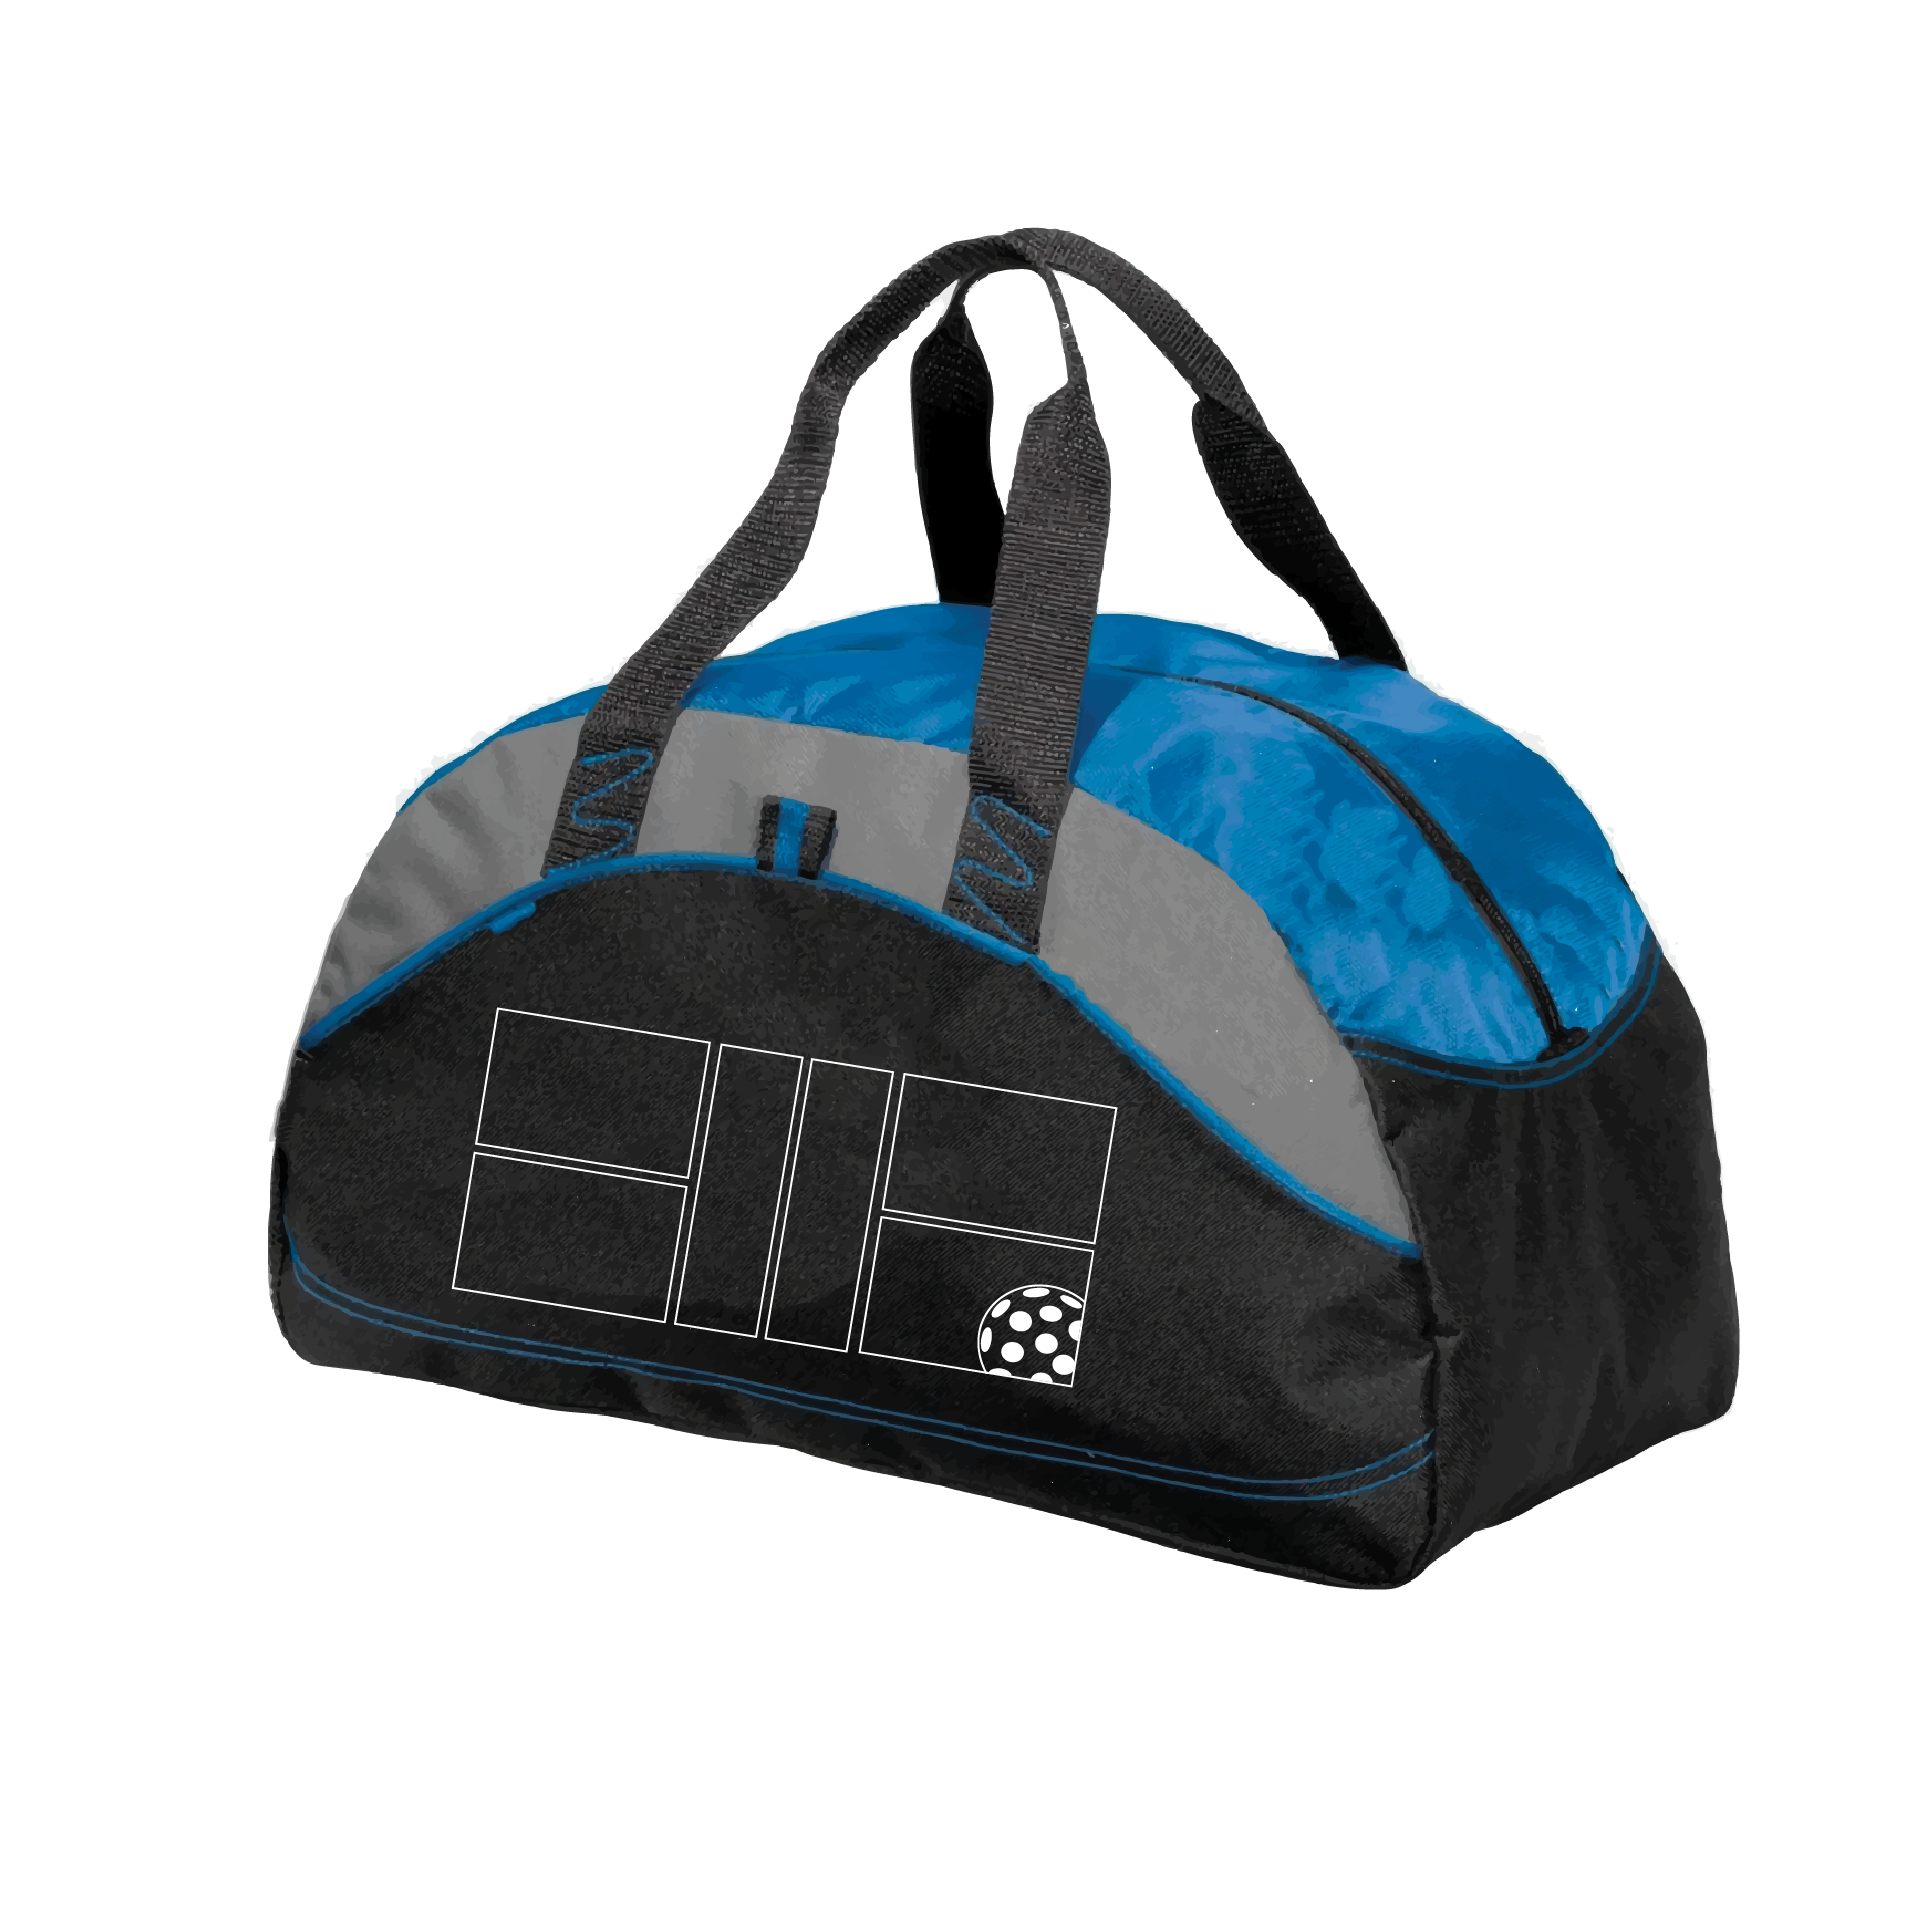 Pickleball Duffel Bag Design: Pickleball Court with Pickleball  Carry your gear in comfort and style. This fun pickleball duffel bag is the perfect accessory for all pickleball players needing to keep their gear in one place. This medium sized duffel tote is ideal for all your pickleball activities. The large center compartment allows for plenty of space and the mesh end pocket is perfect for holding a water bottle. 